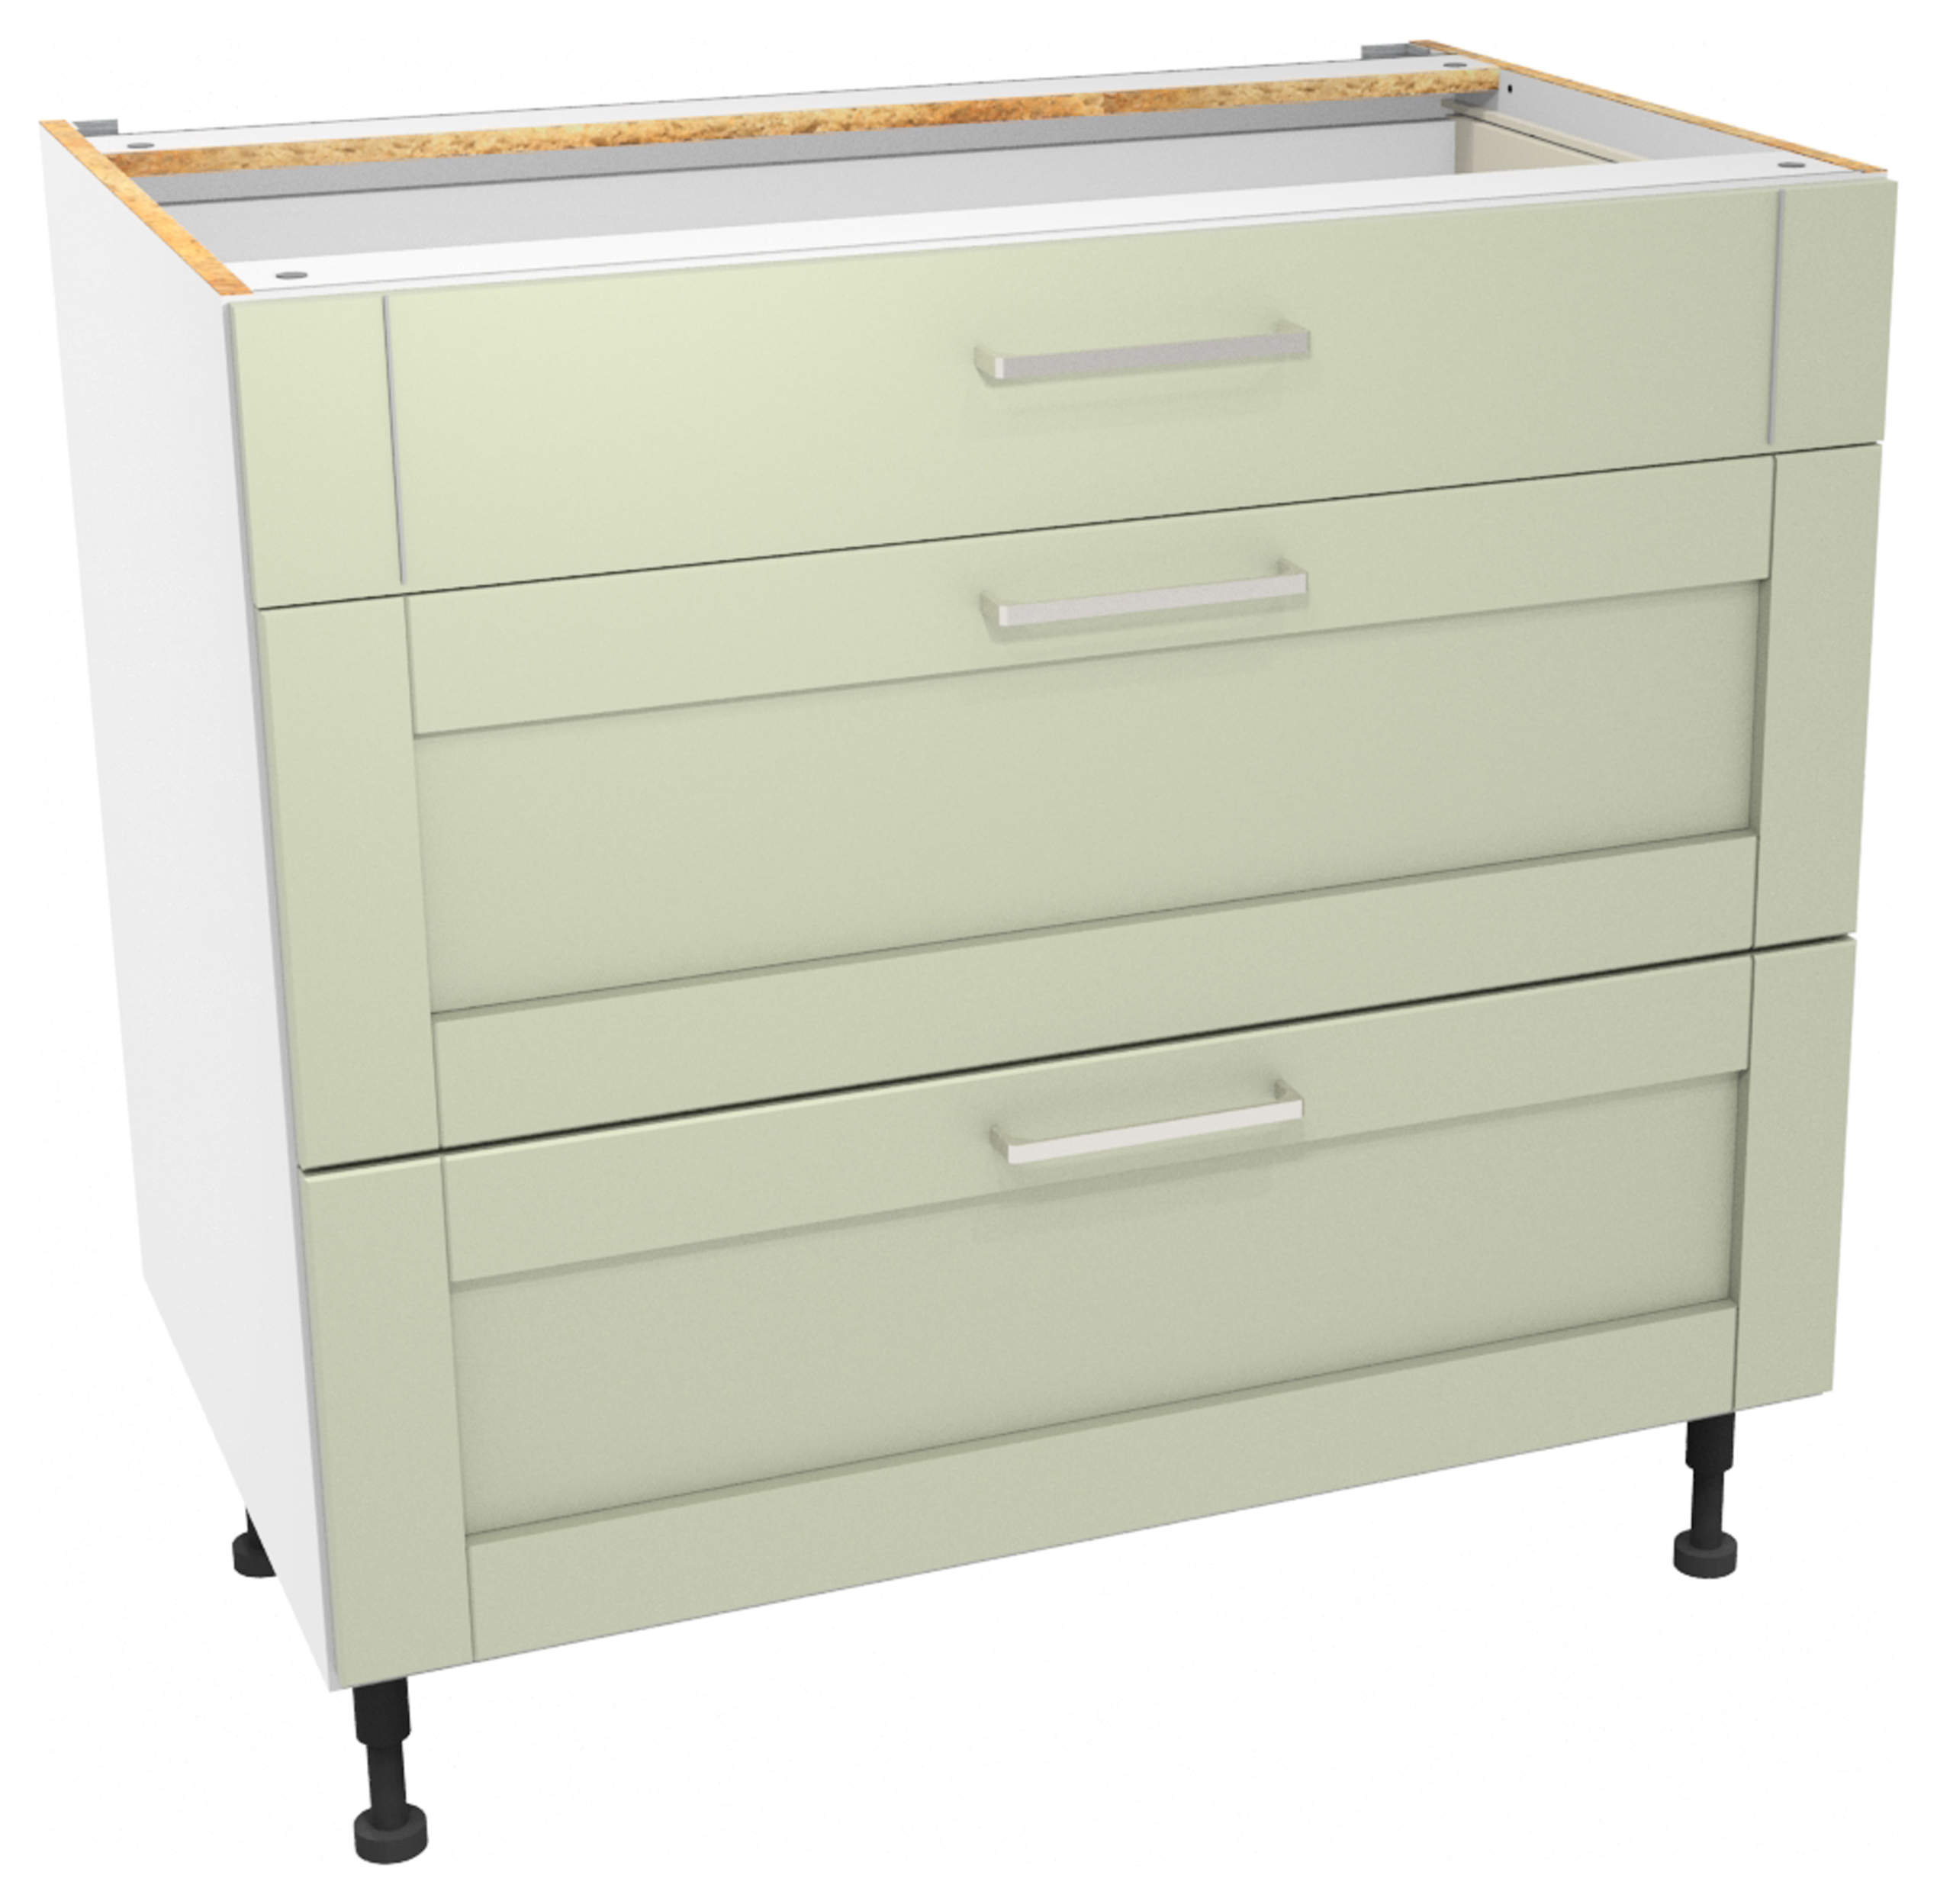 Wickes Ohio Sage Shaker Drawer Unit - 900mm (Part 1 of 2)